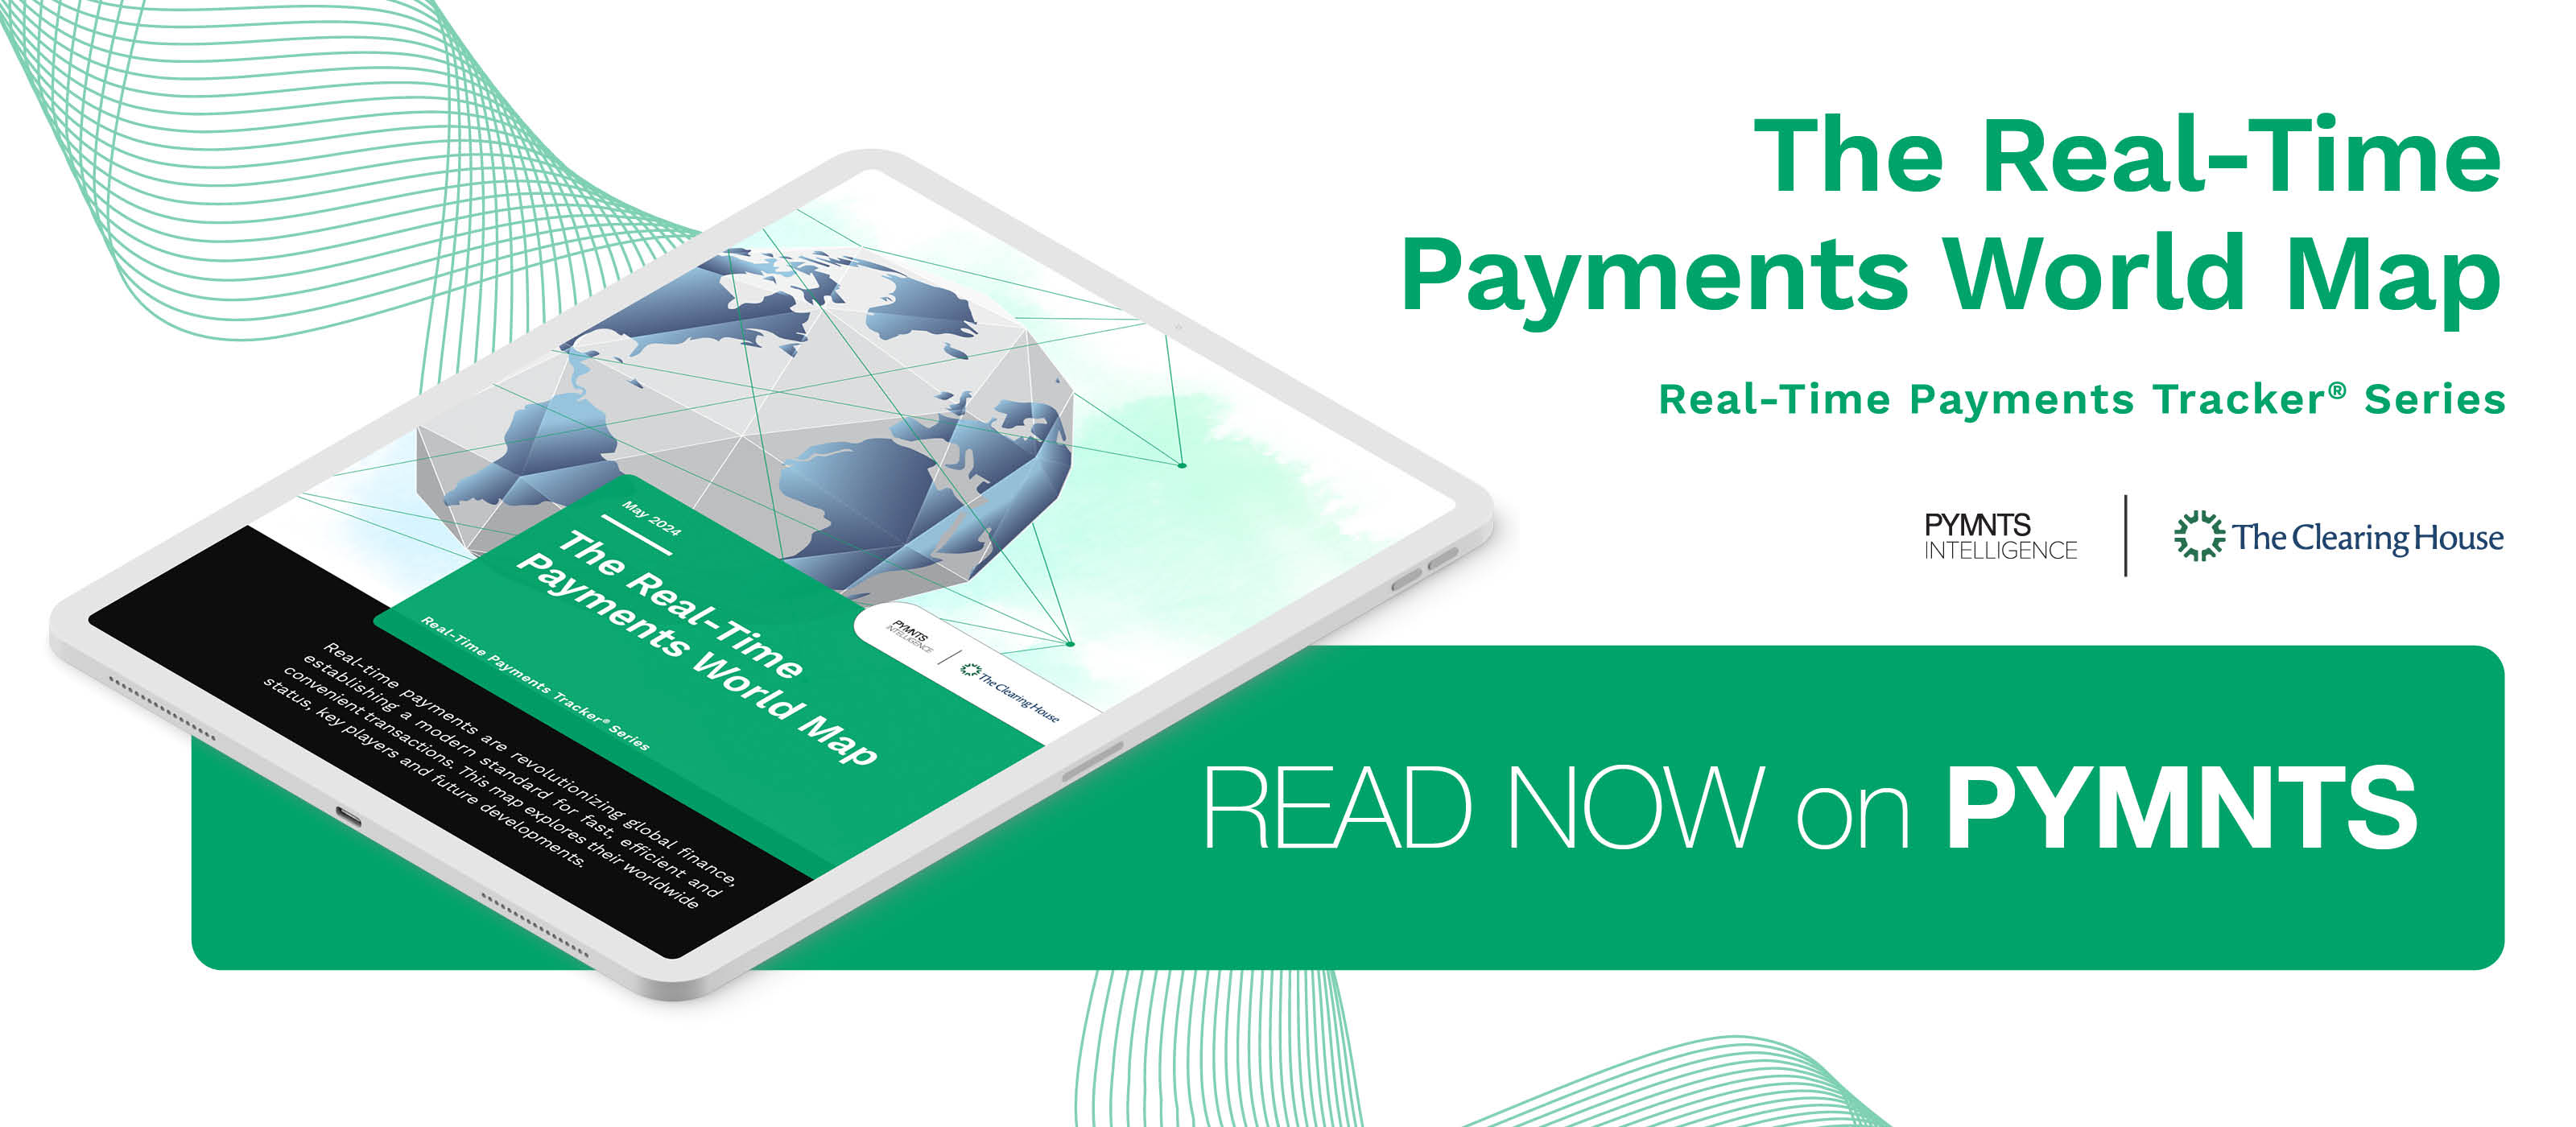 Real-time payments’ next stage is here with NetXD’s cloud solution that helps banks integrate into The Clearing House’s RTP<sup>®</sup> network.